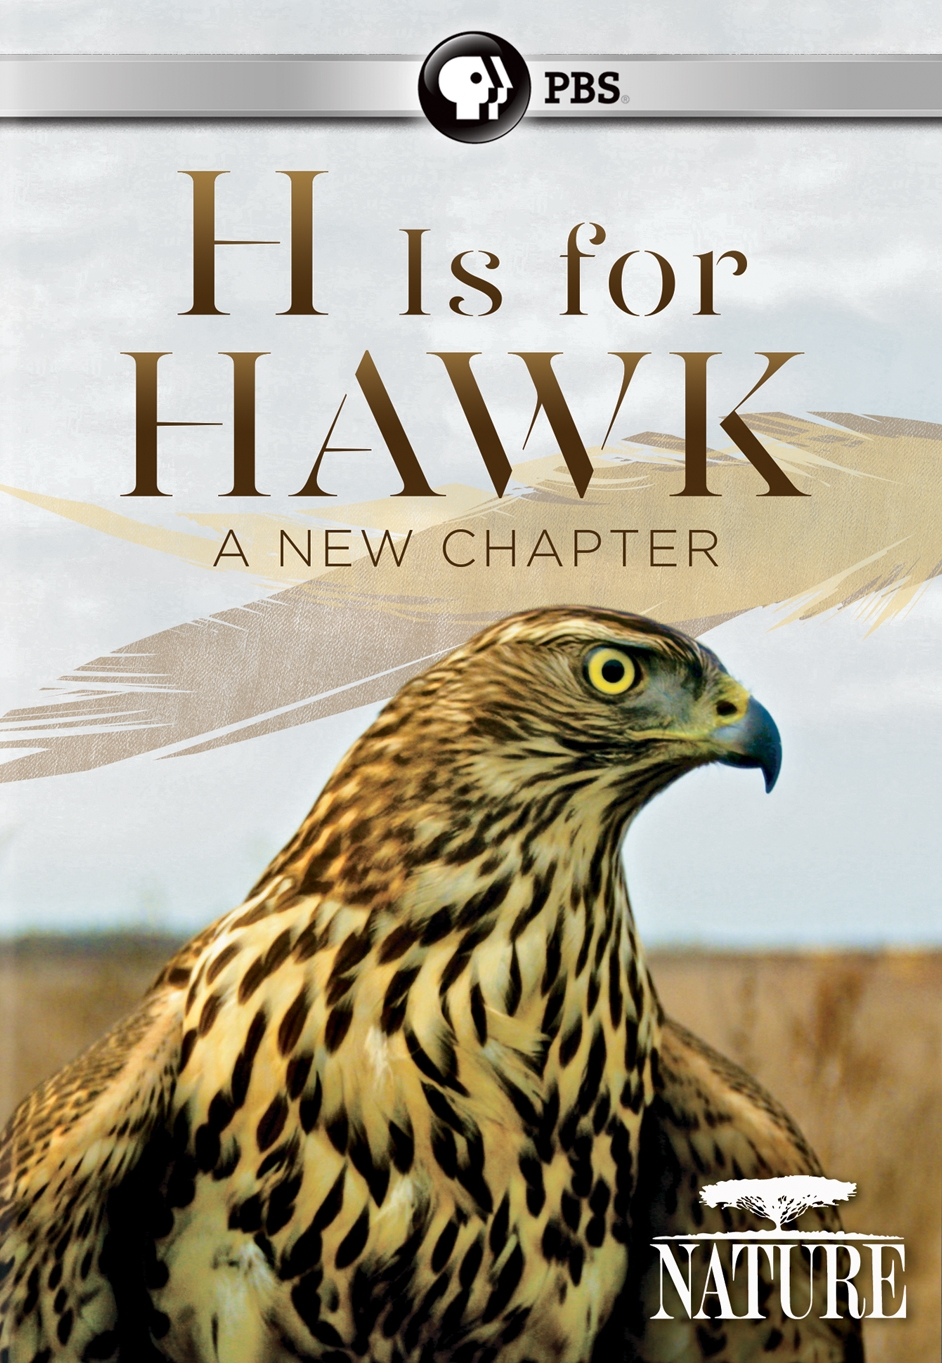 h is for hawk goodreads